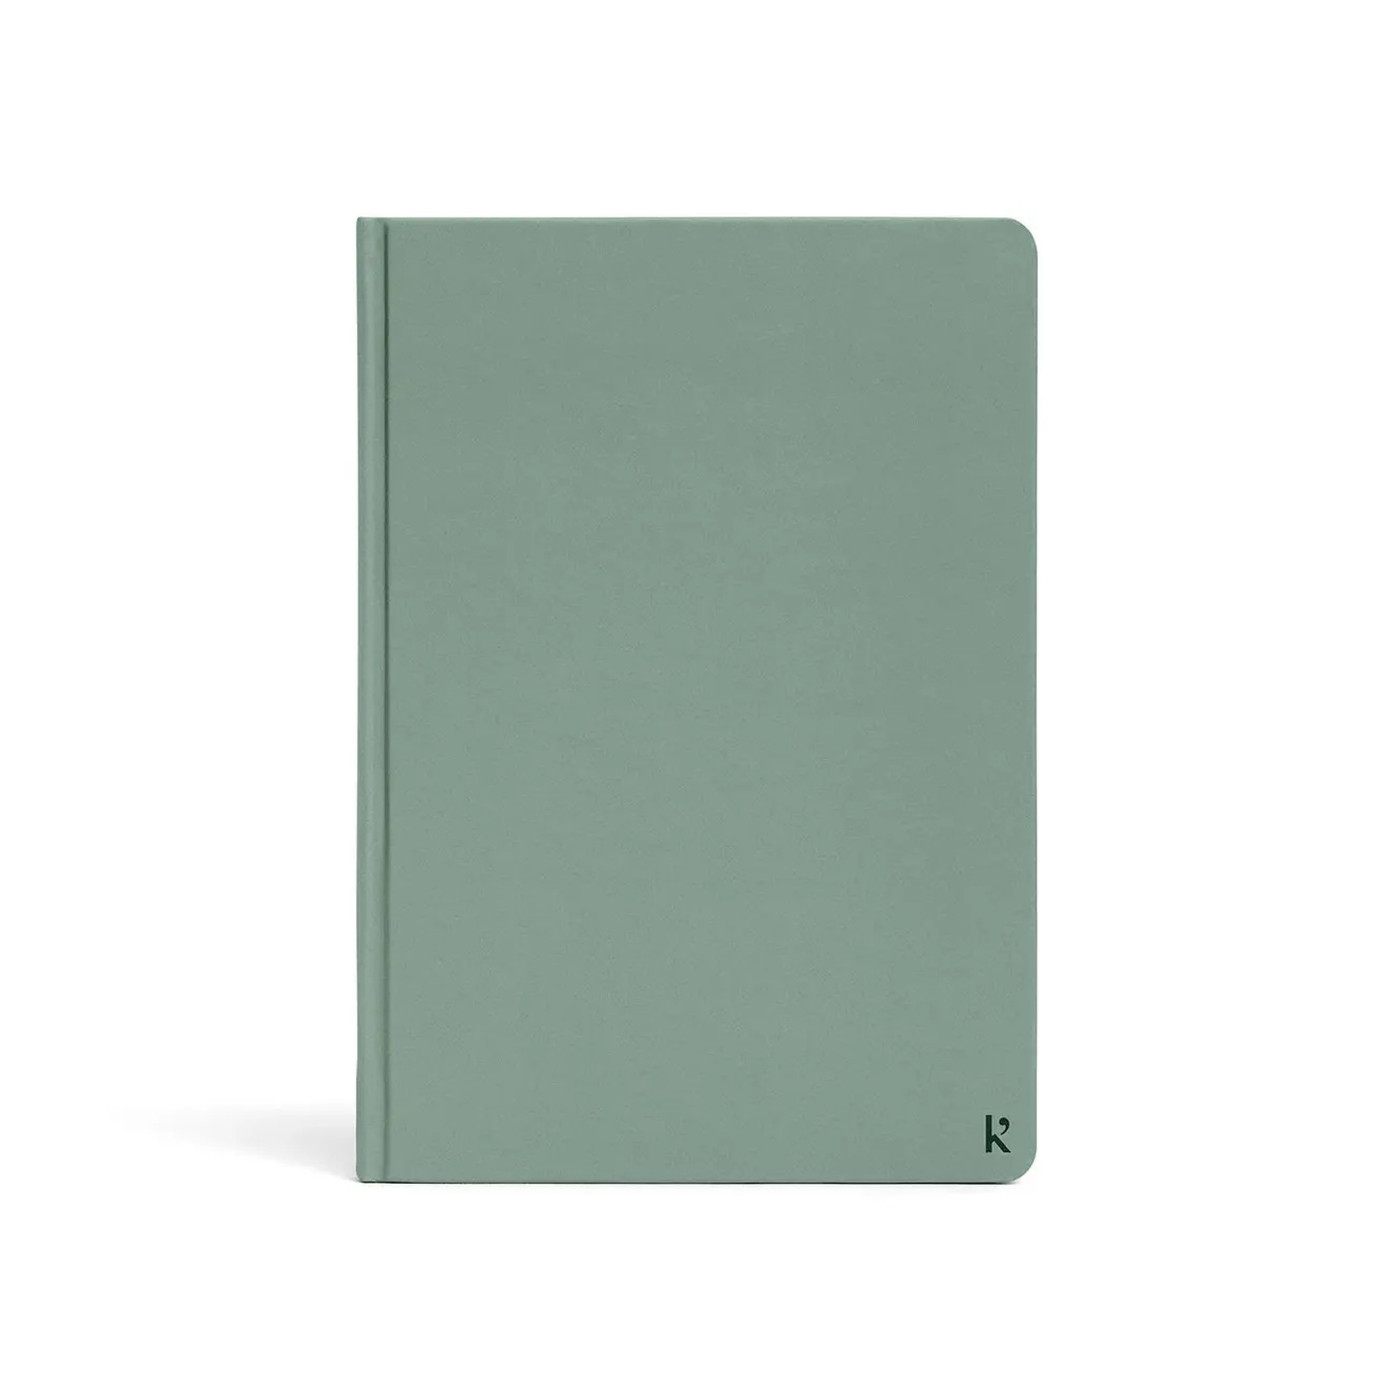 Karst stone paper notebook - hard cover - A5 DOTTED